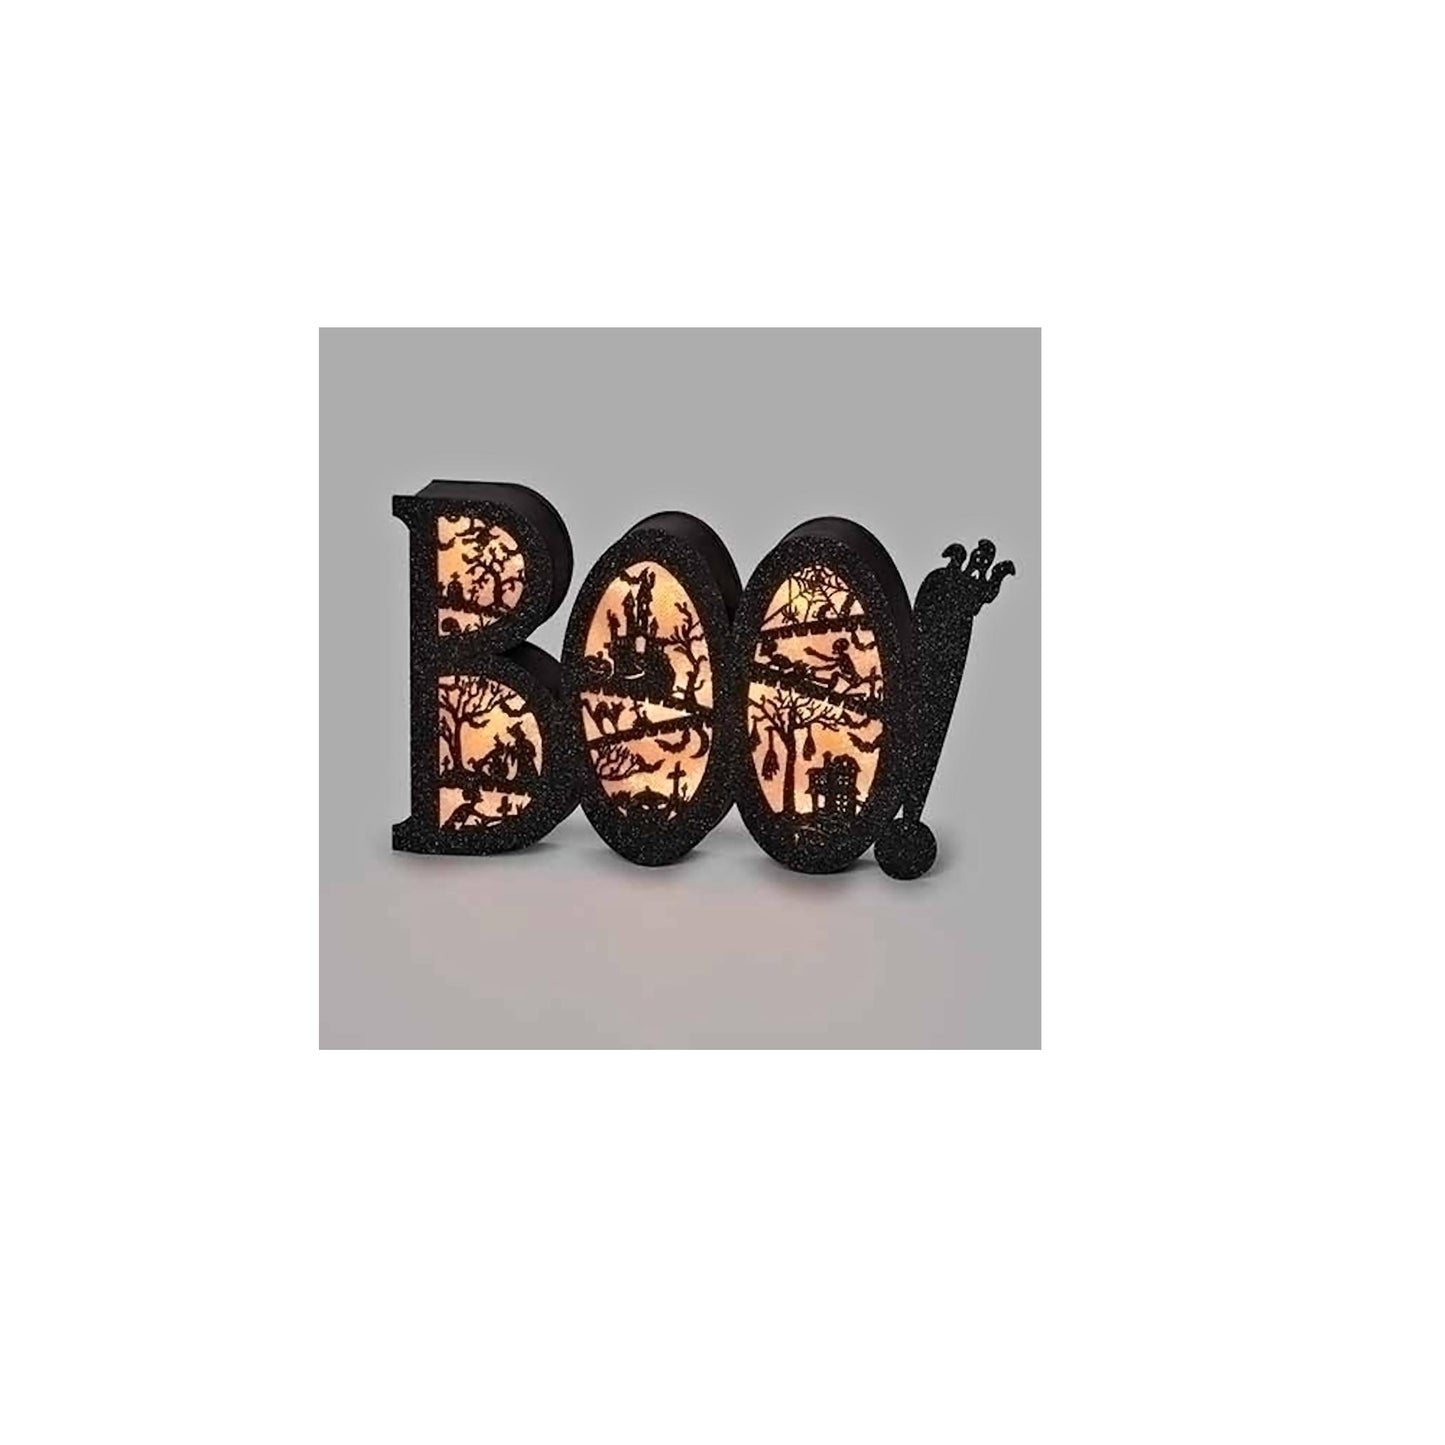 Roman 5"H Boo with Scene LED Sign for Halloween